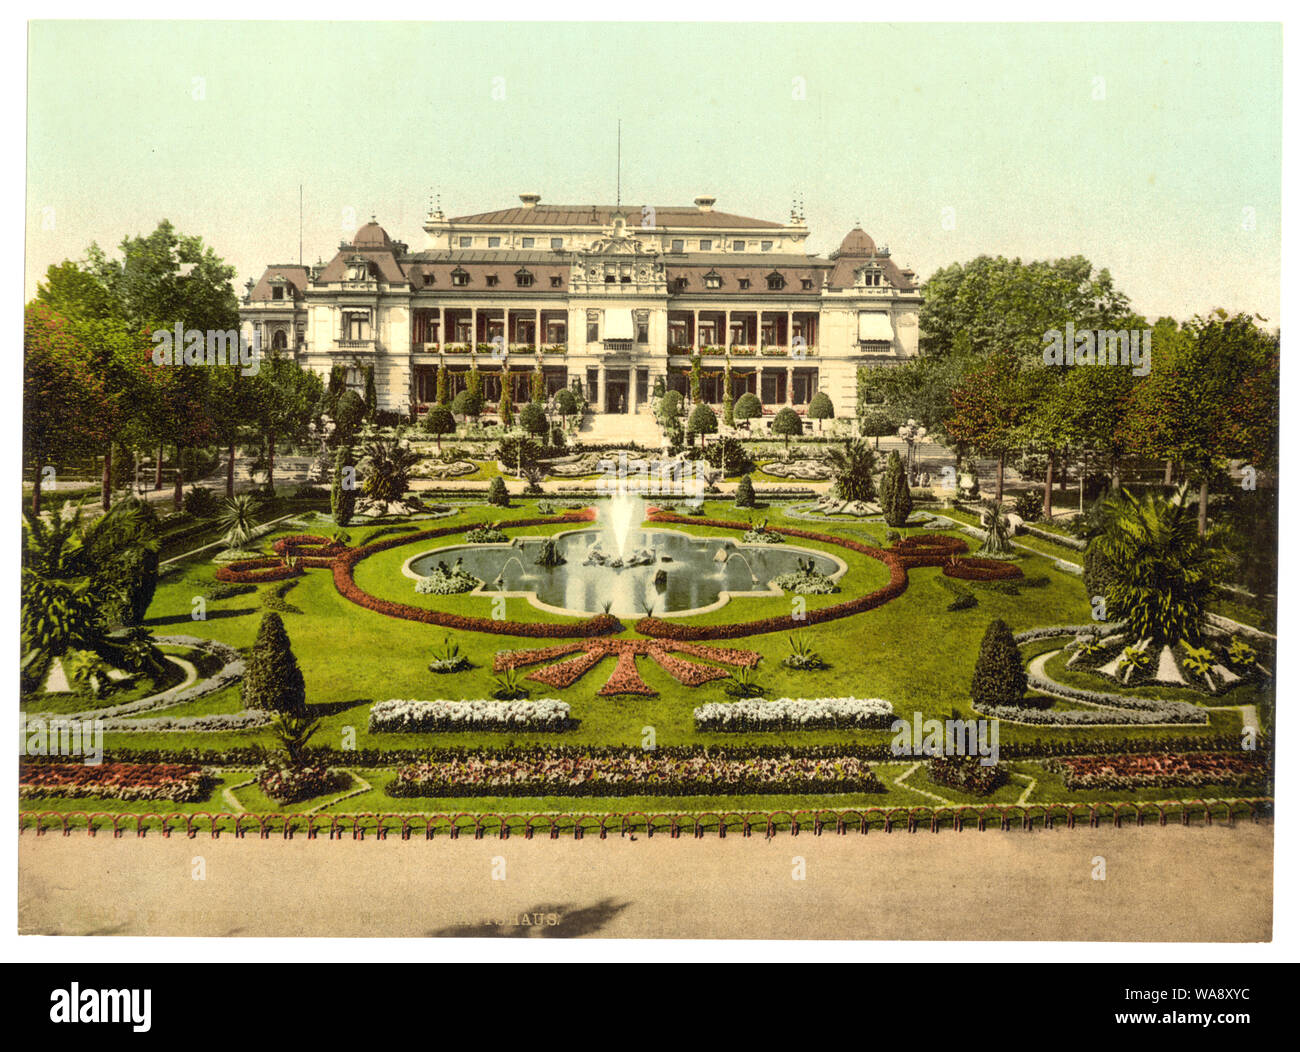 Casino with Palm Garden, Frankfort on Main (i.e. Frankfurt am Main), Germany; Print no. 1596.; Title from the Detroit Publishing Co., catalogue J-foreign section. Detroit, Mich. : Detroit Photographic Company, 1905..; Forms part of: Views of Germany in the Photochrom print collection. Stock Photo